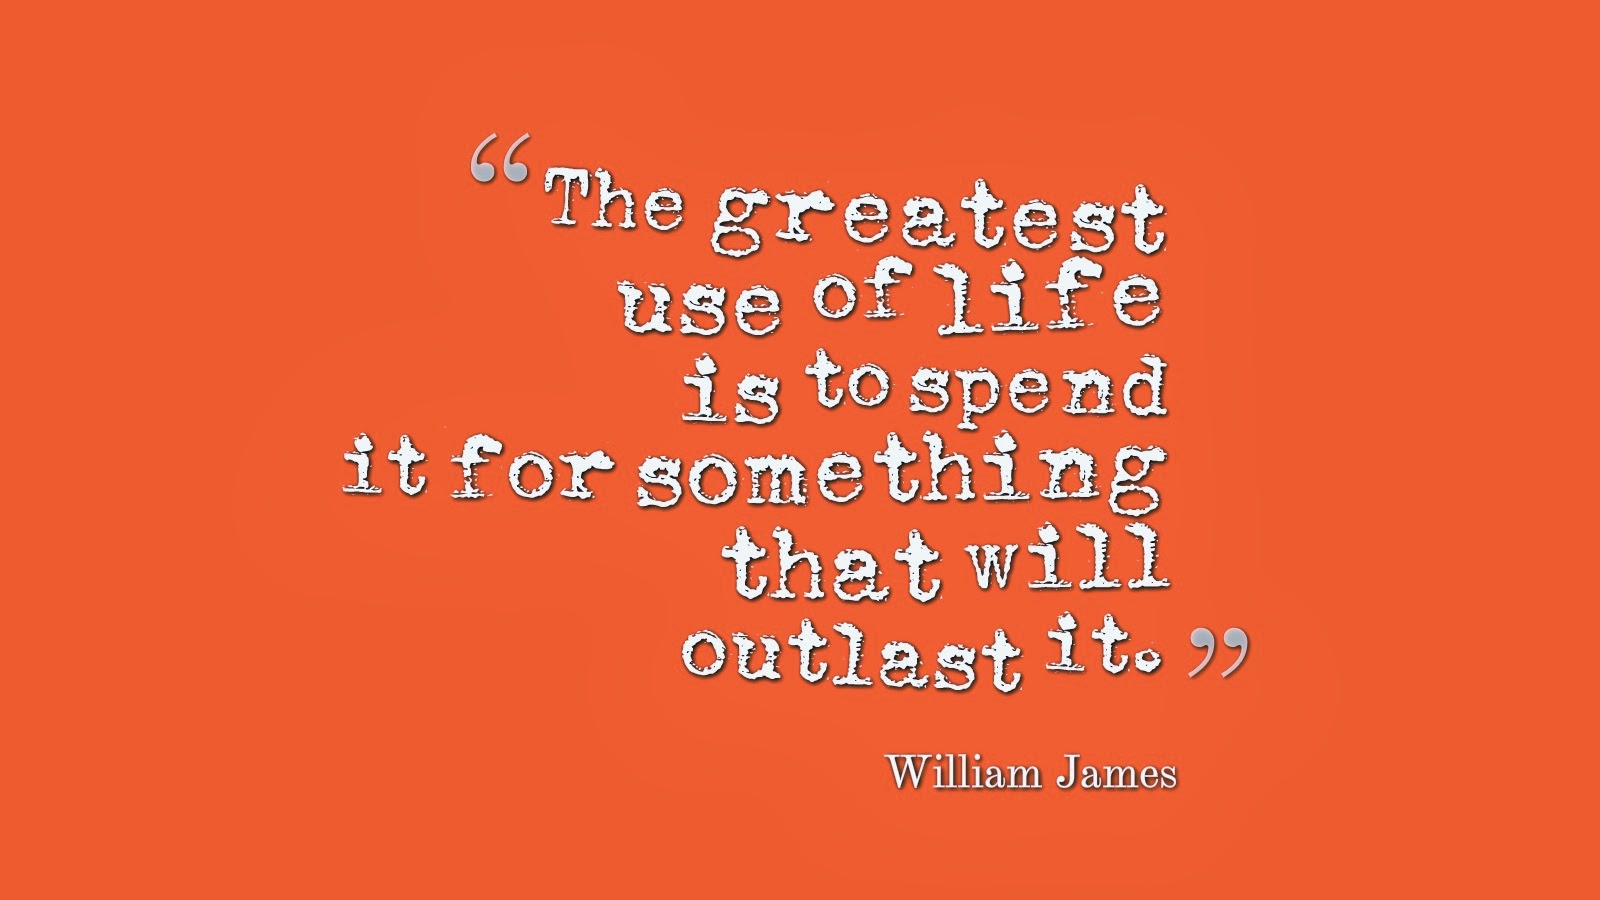 The great use of Life is to spend it for something that will Outlast it William James. The great use of Life is to spend it for something that will Outlast it.